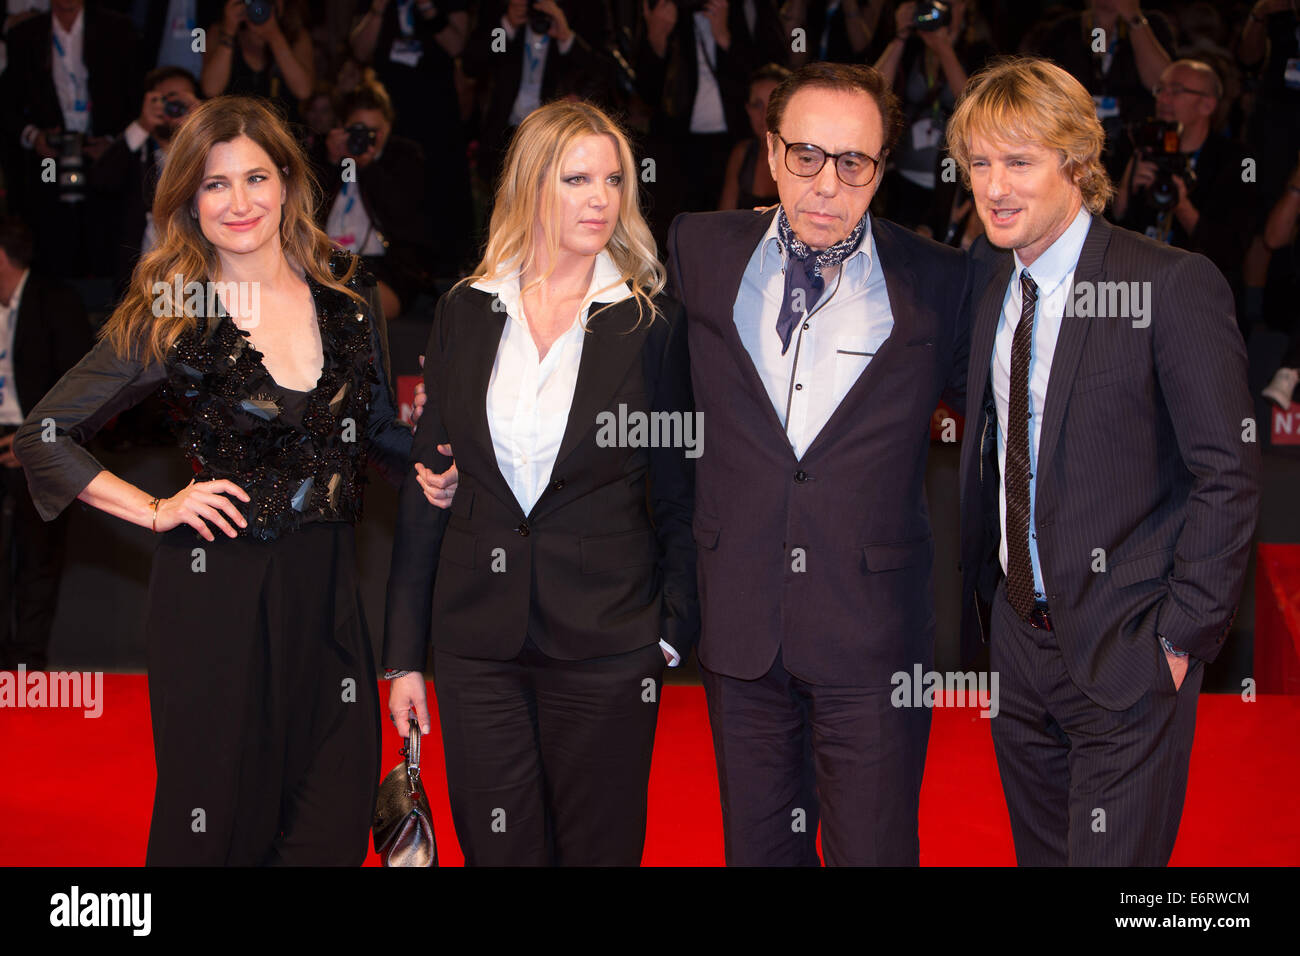 Venice, Italy. 29th August, 2014. 71st Venice Film Festival. Kathryn Hahn, Louise Stratten, Peter Bogdanovich, Owen Wilson at 'She's Funny That Way' premiere. Stock Photo